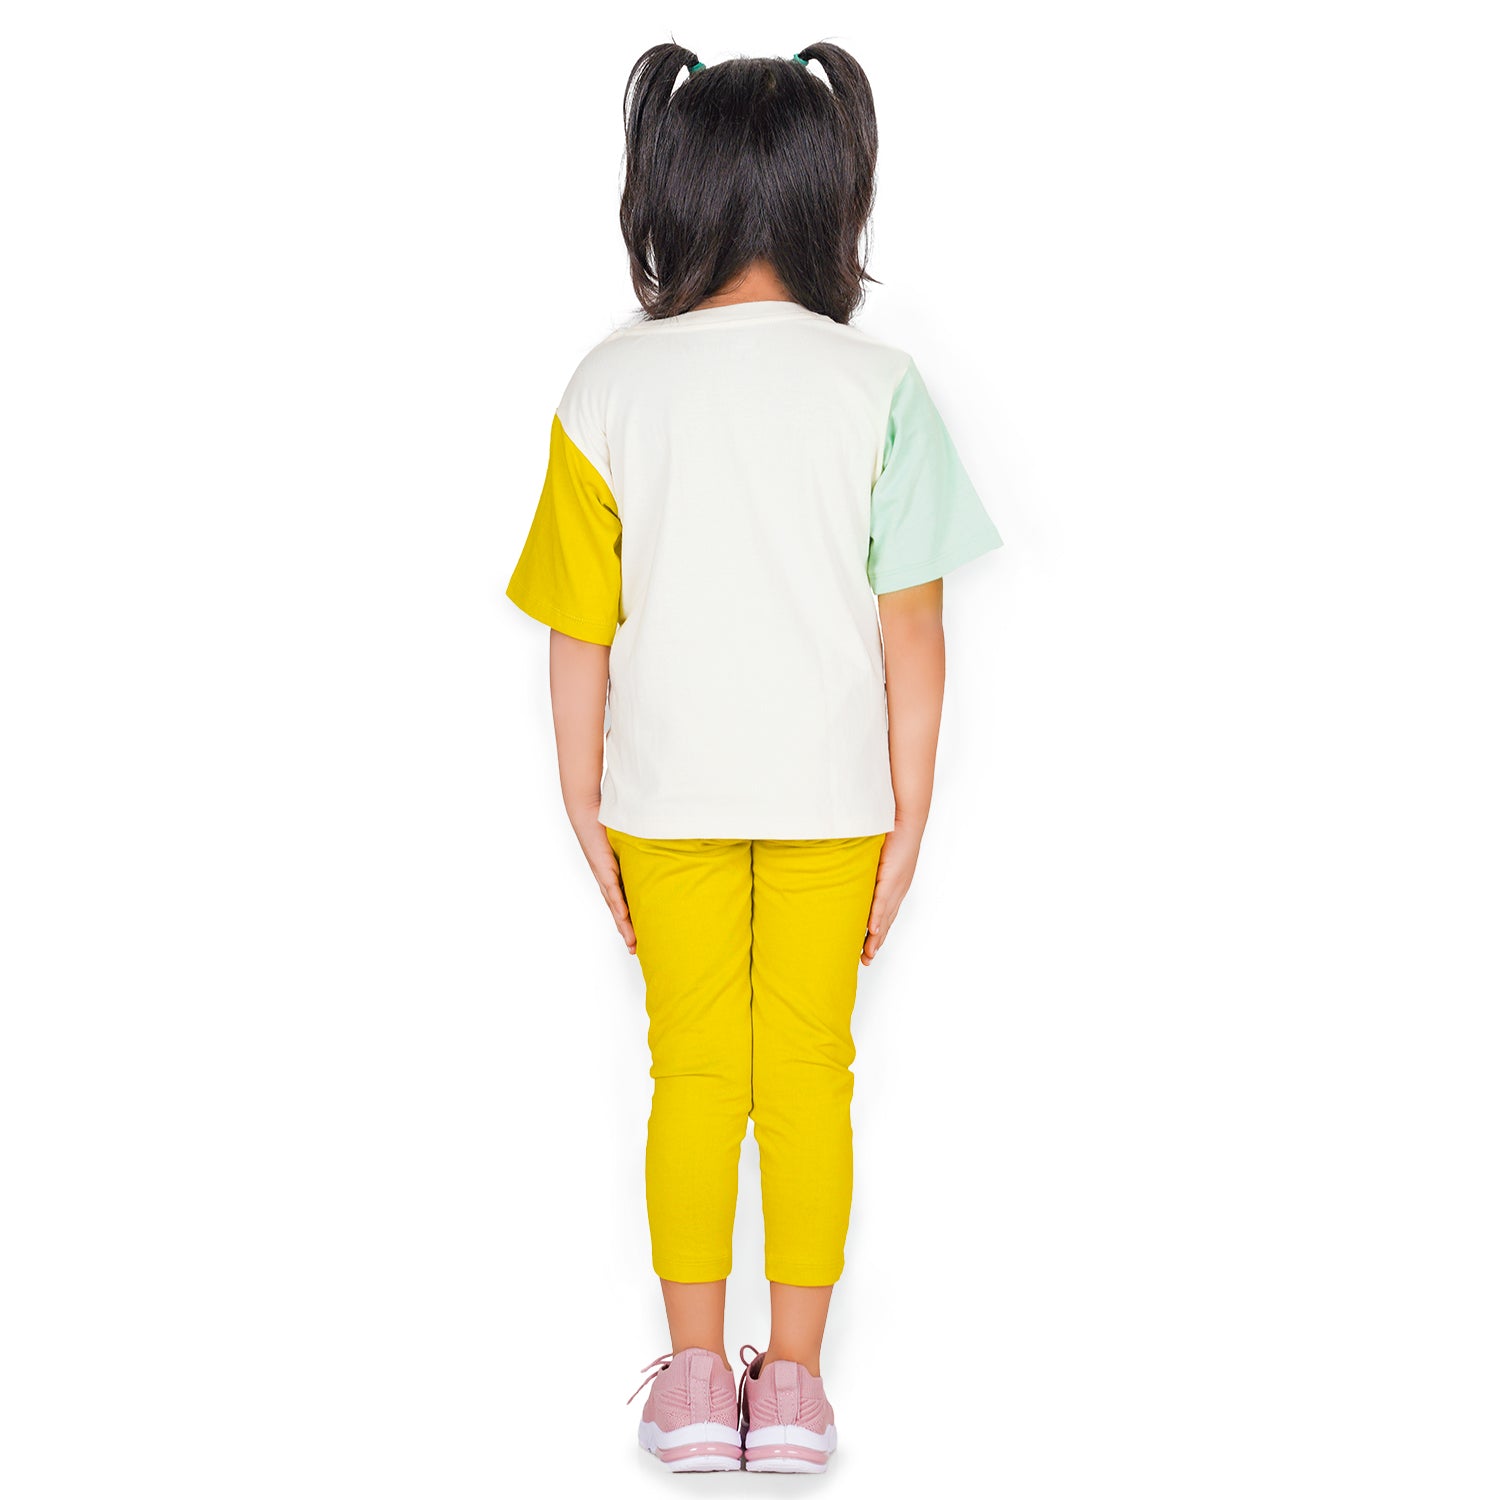 Miko Lolo Coral Dream T-shirt with Mustard Ripple Leggings Set